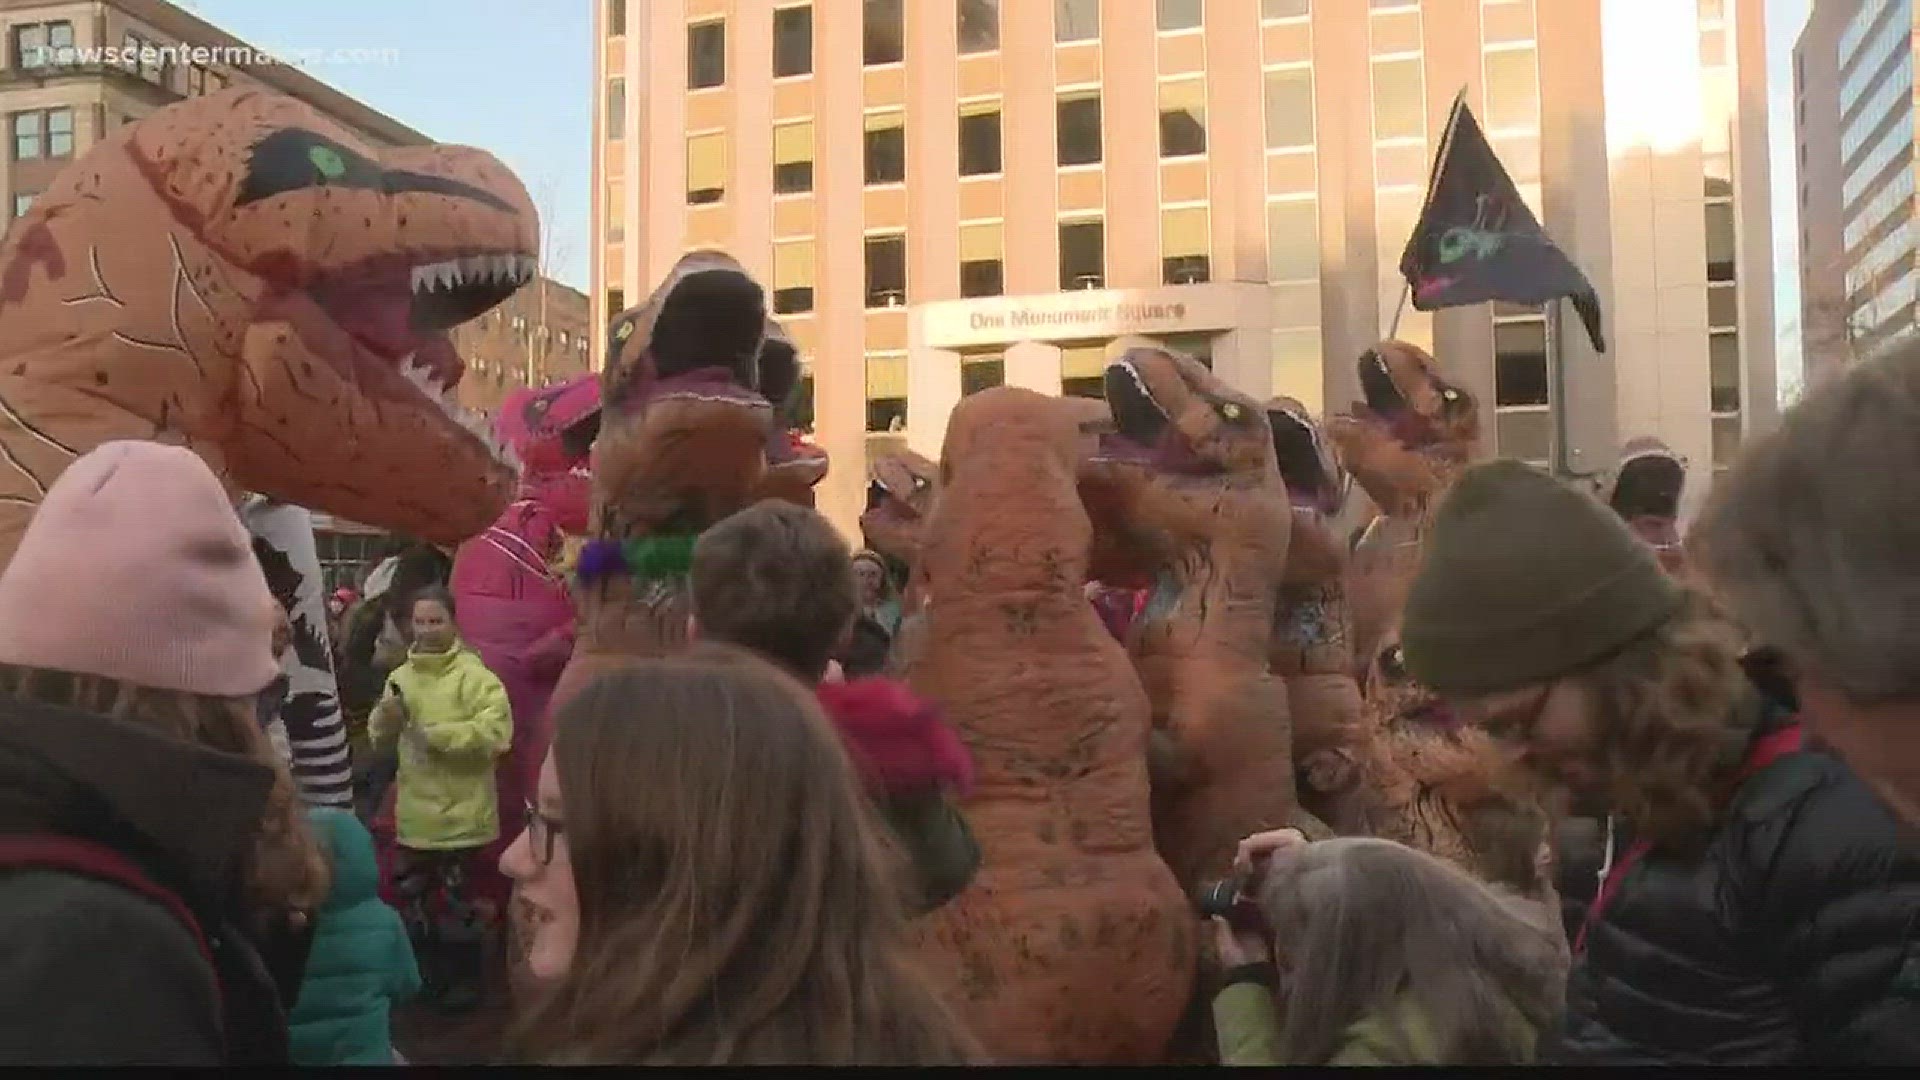 T-Rex's gather at Monument Sq. Portland